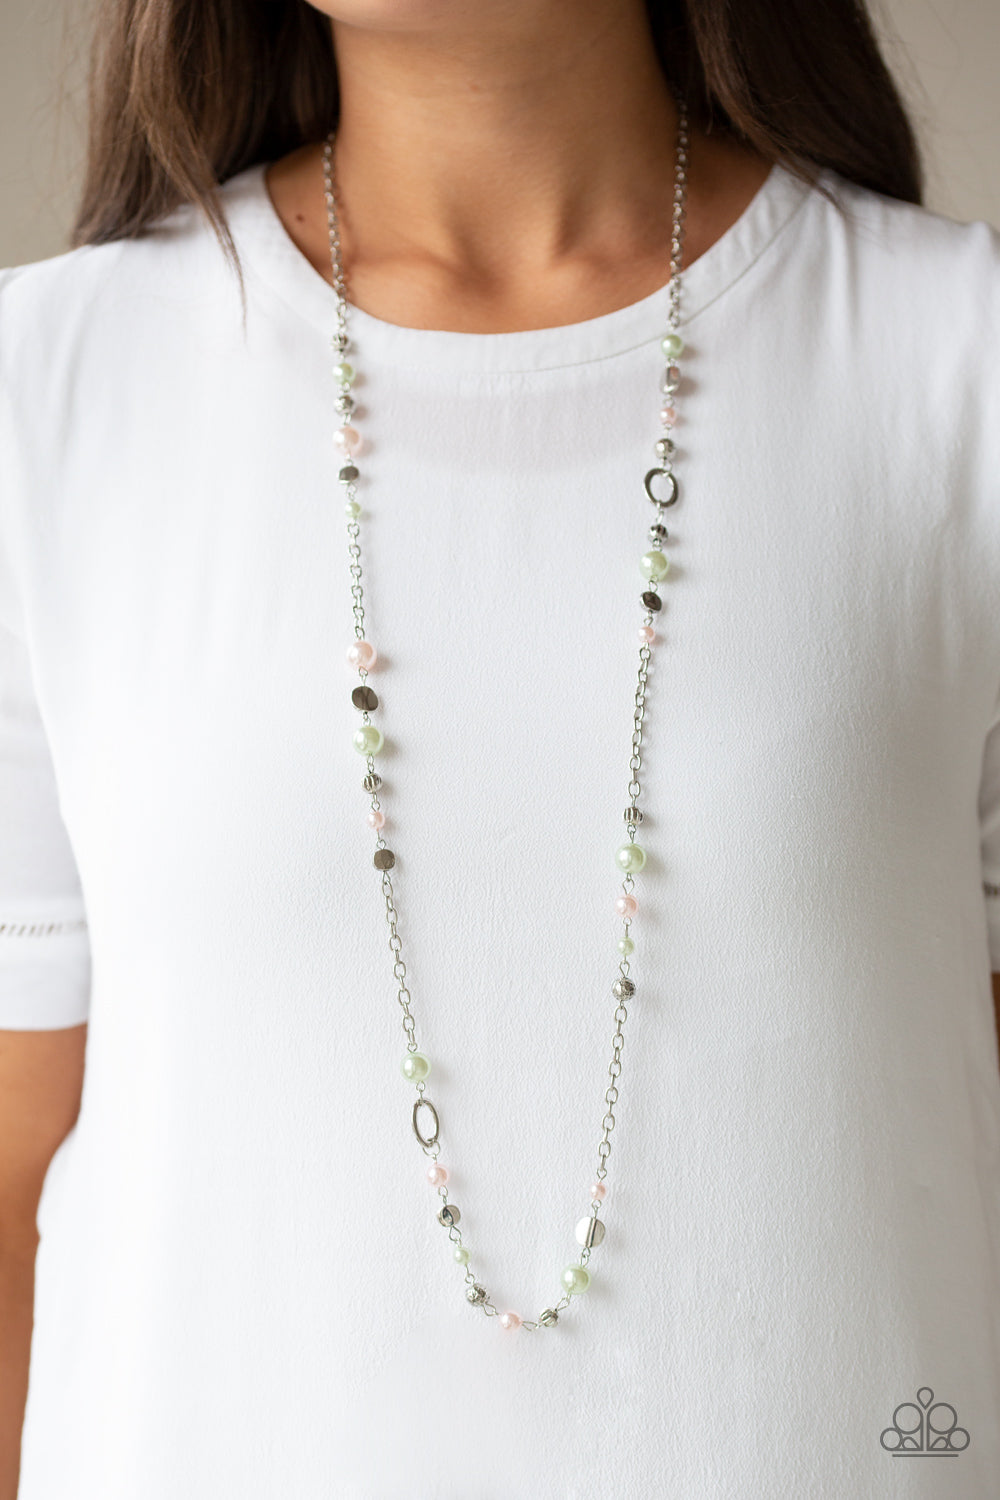 Paparazzi Accessories - Make An Appearance - Multicolored Necklace